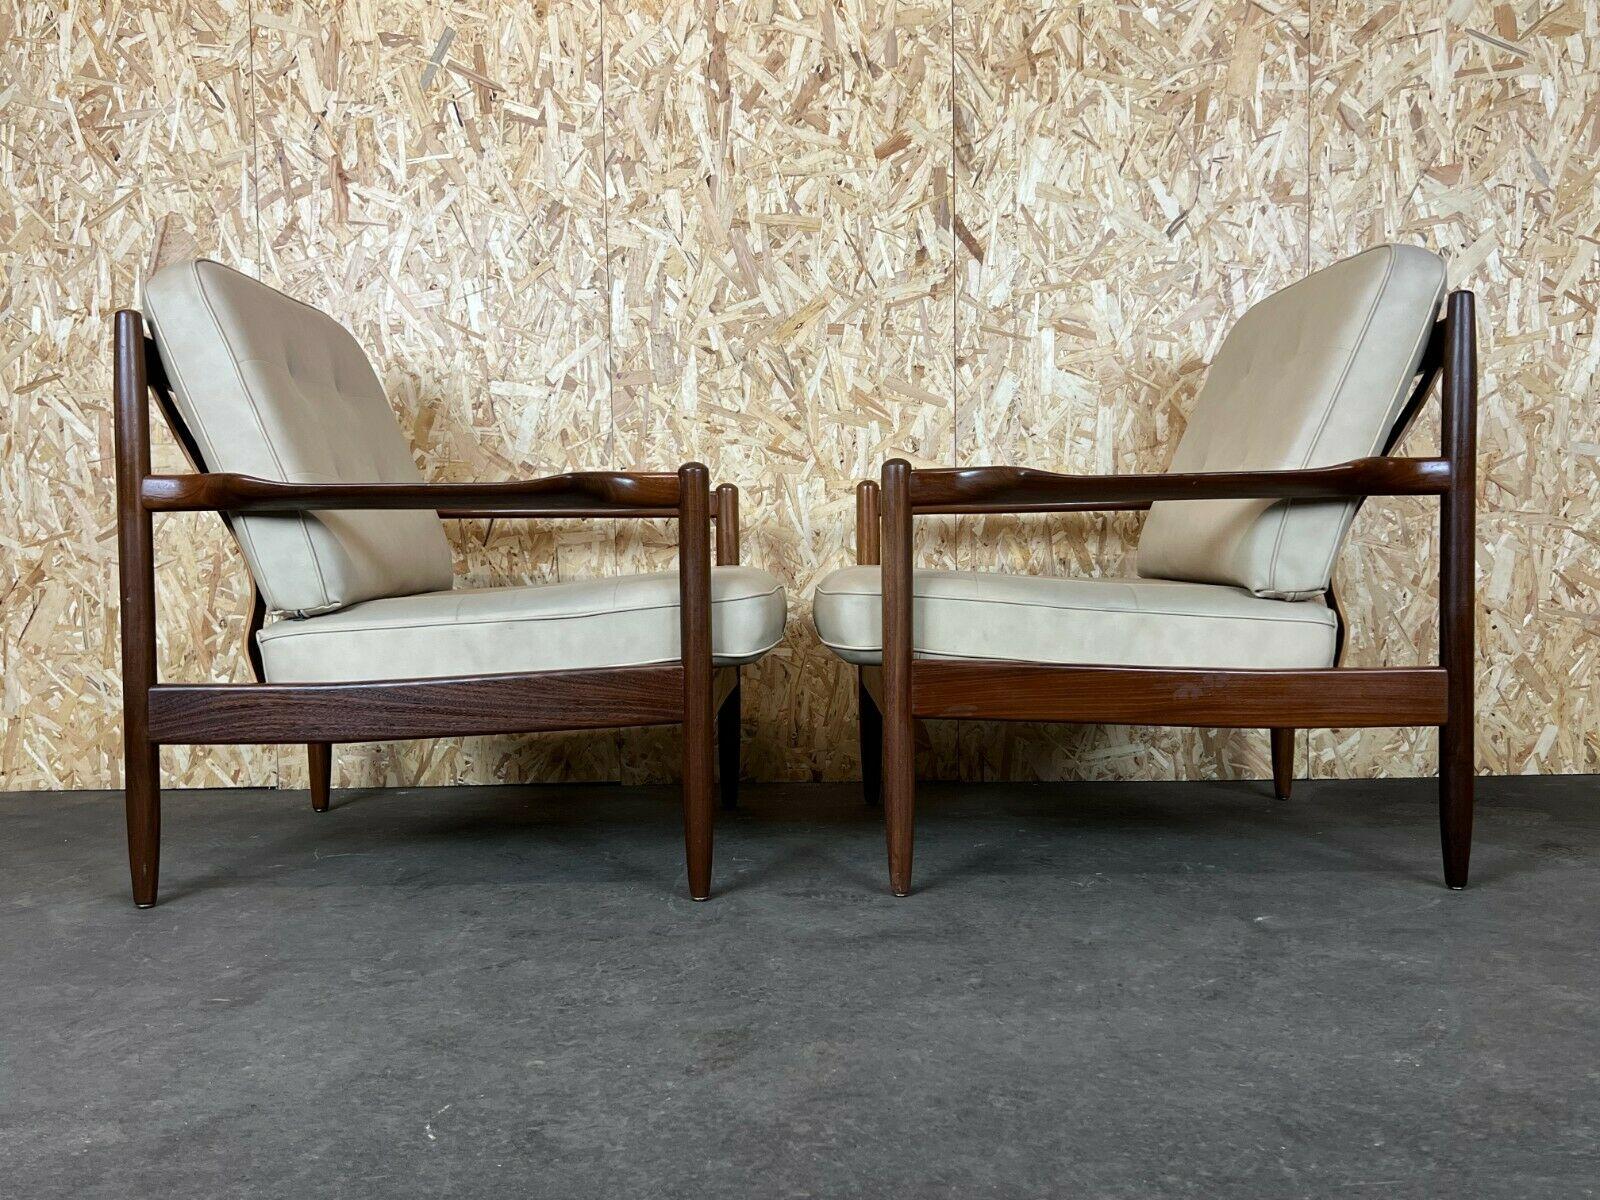 2x 60s 70s easy chair lounge chair Danish Modern Design 70s 60s

Object: 2x Easy Chair

Manufacturer:

Condition: good - vintage

Age: around 1960-1970

Dimensions:

76.5cm x 84cm x 81cm
Seat height = 41cm

Other notes:

The